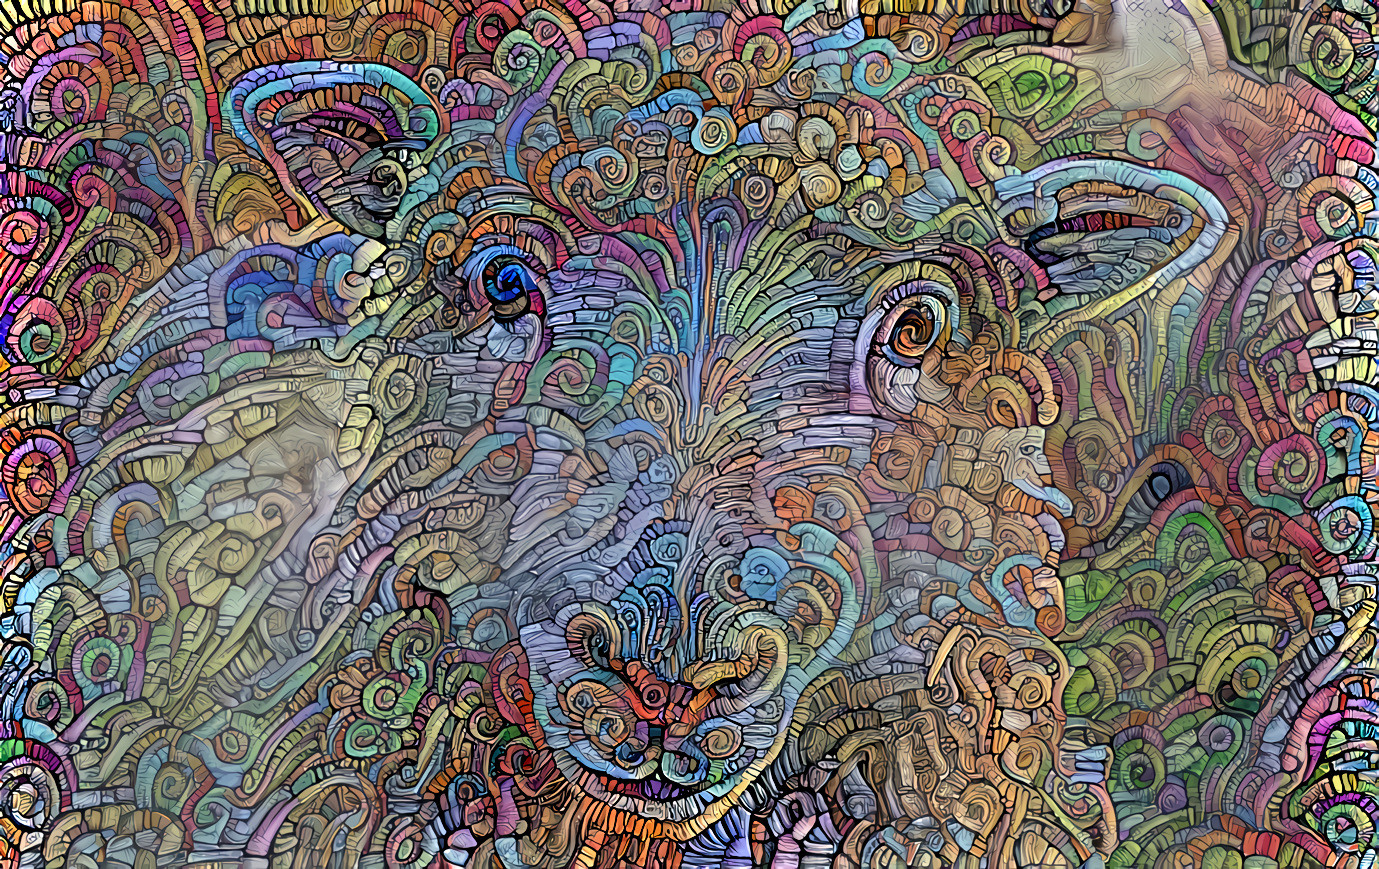 Shaggy sheep, colored curls